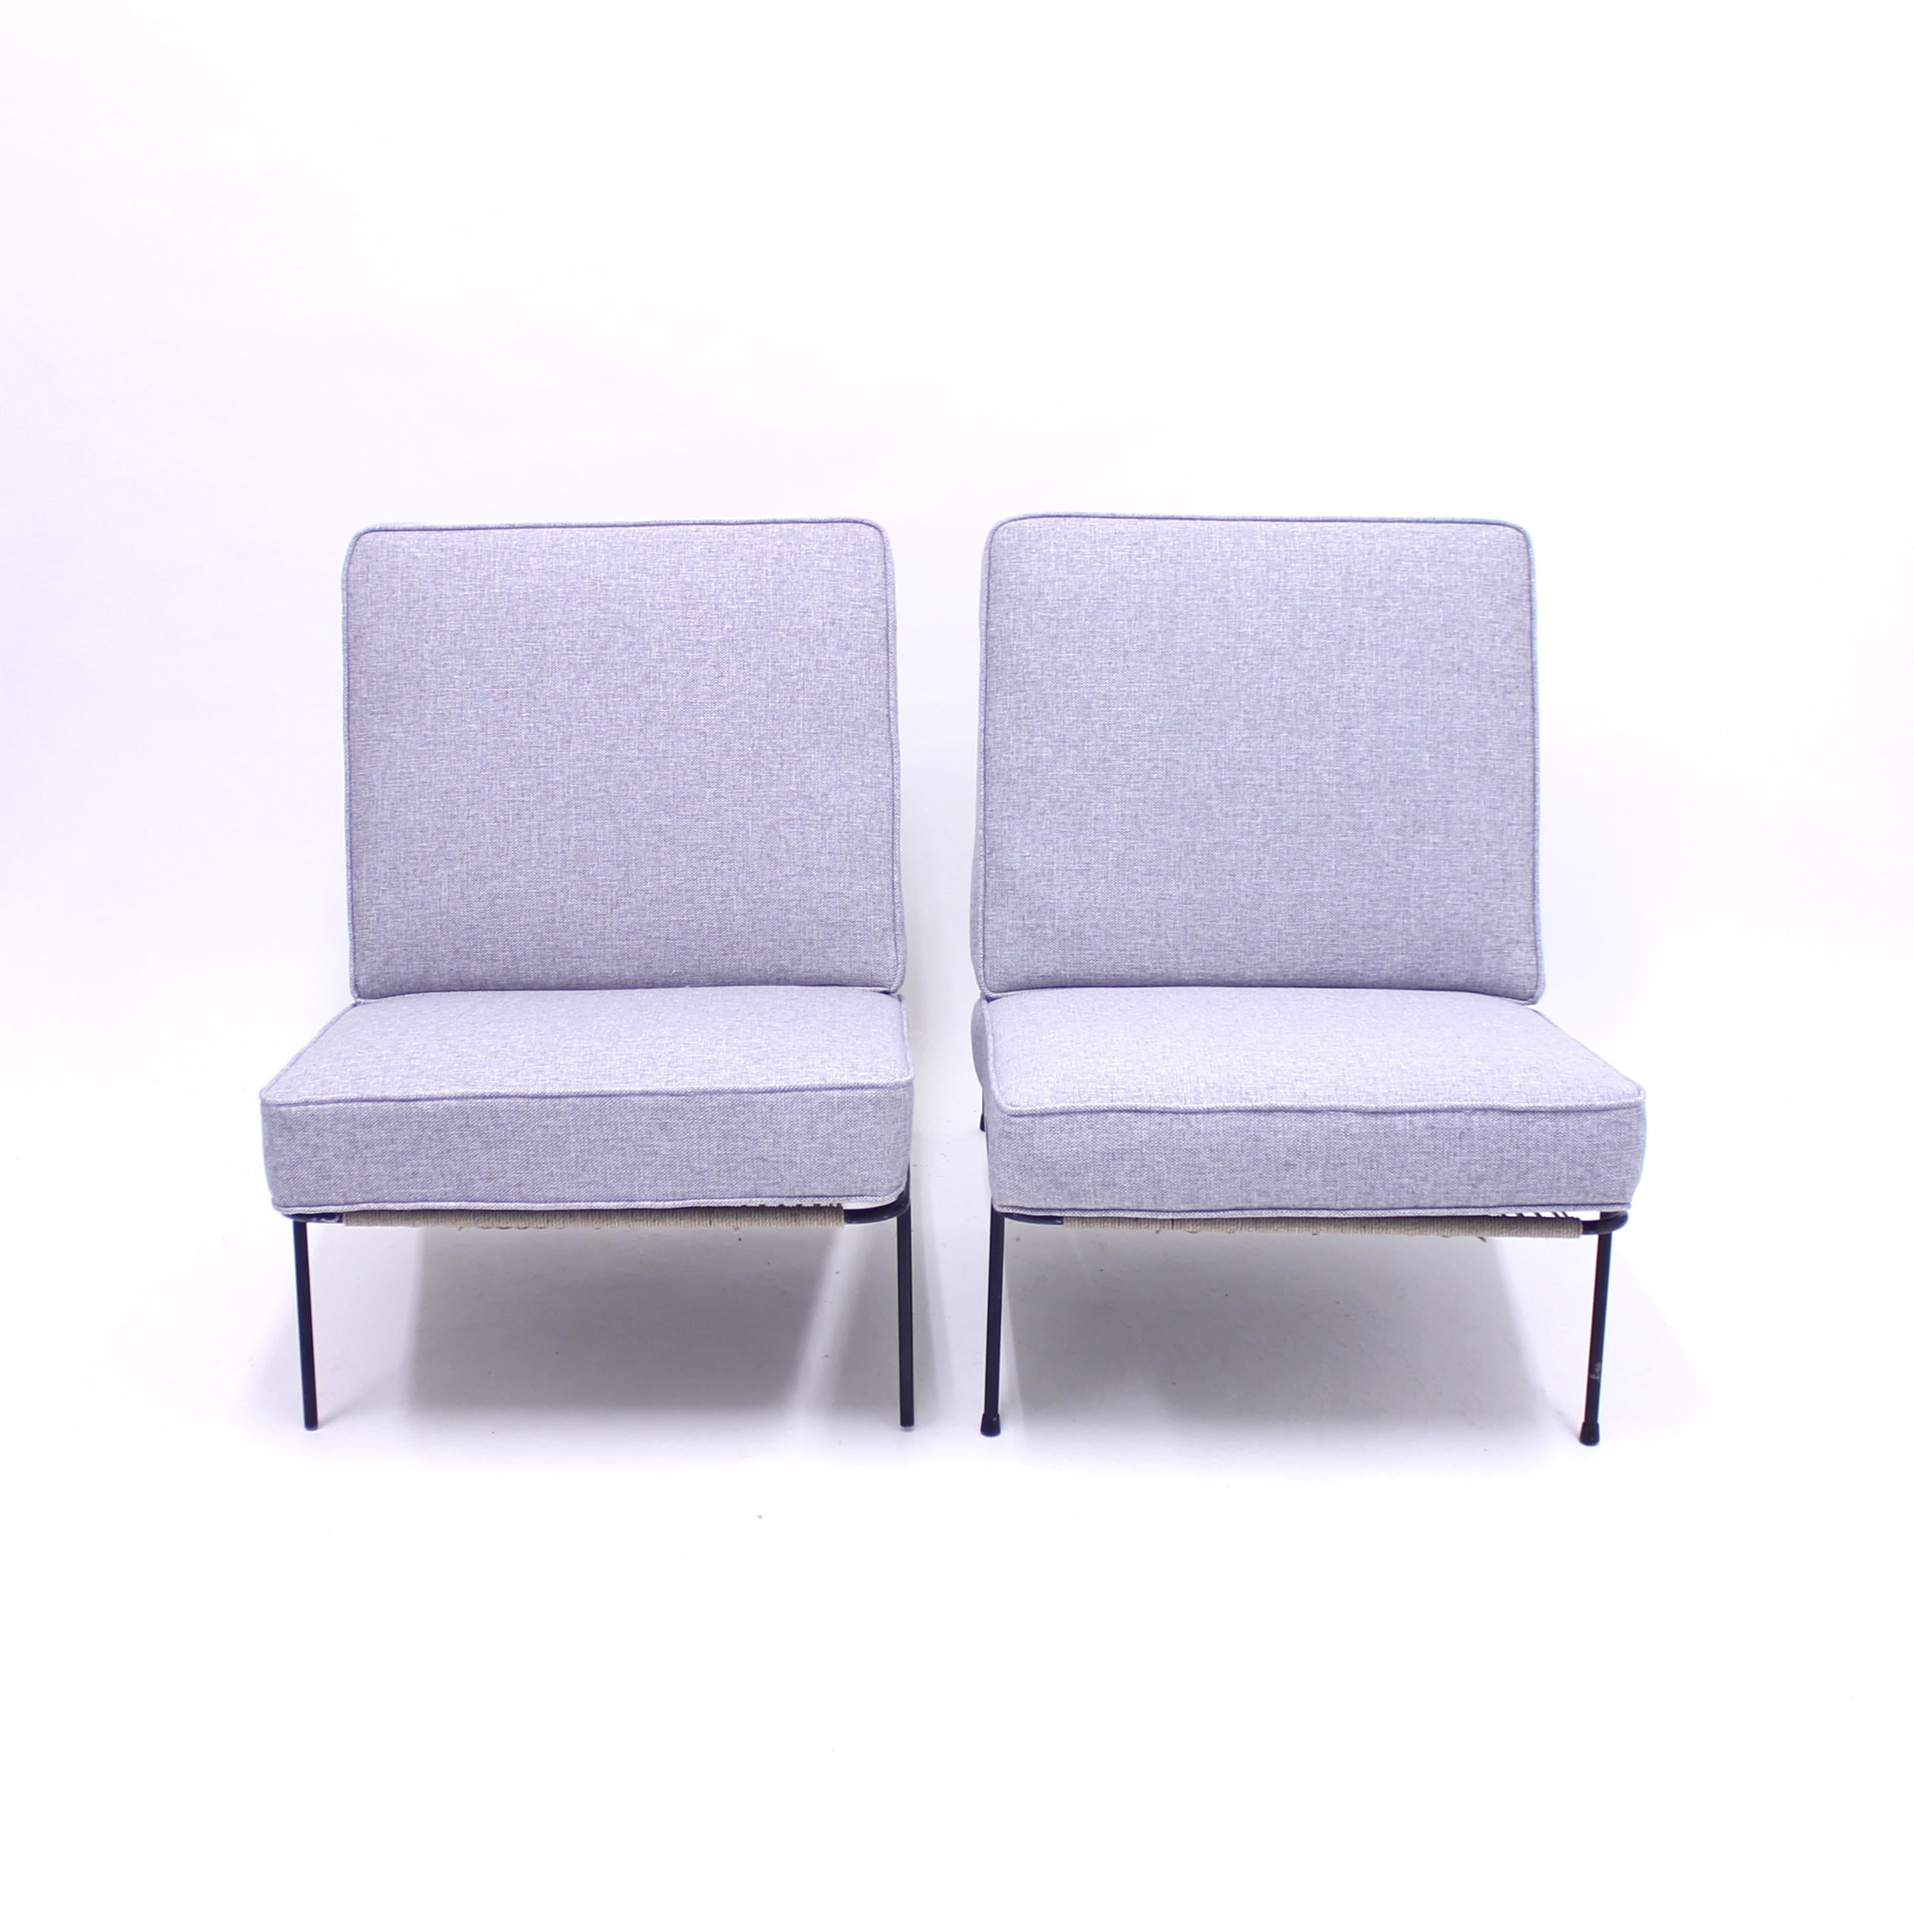 20th Century Alf Svensson, Pair of Domus Lounge Chairs, DUX, 1950s For Sale